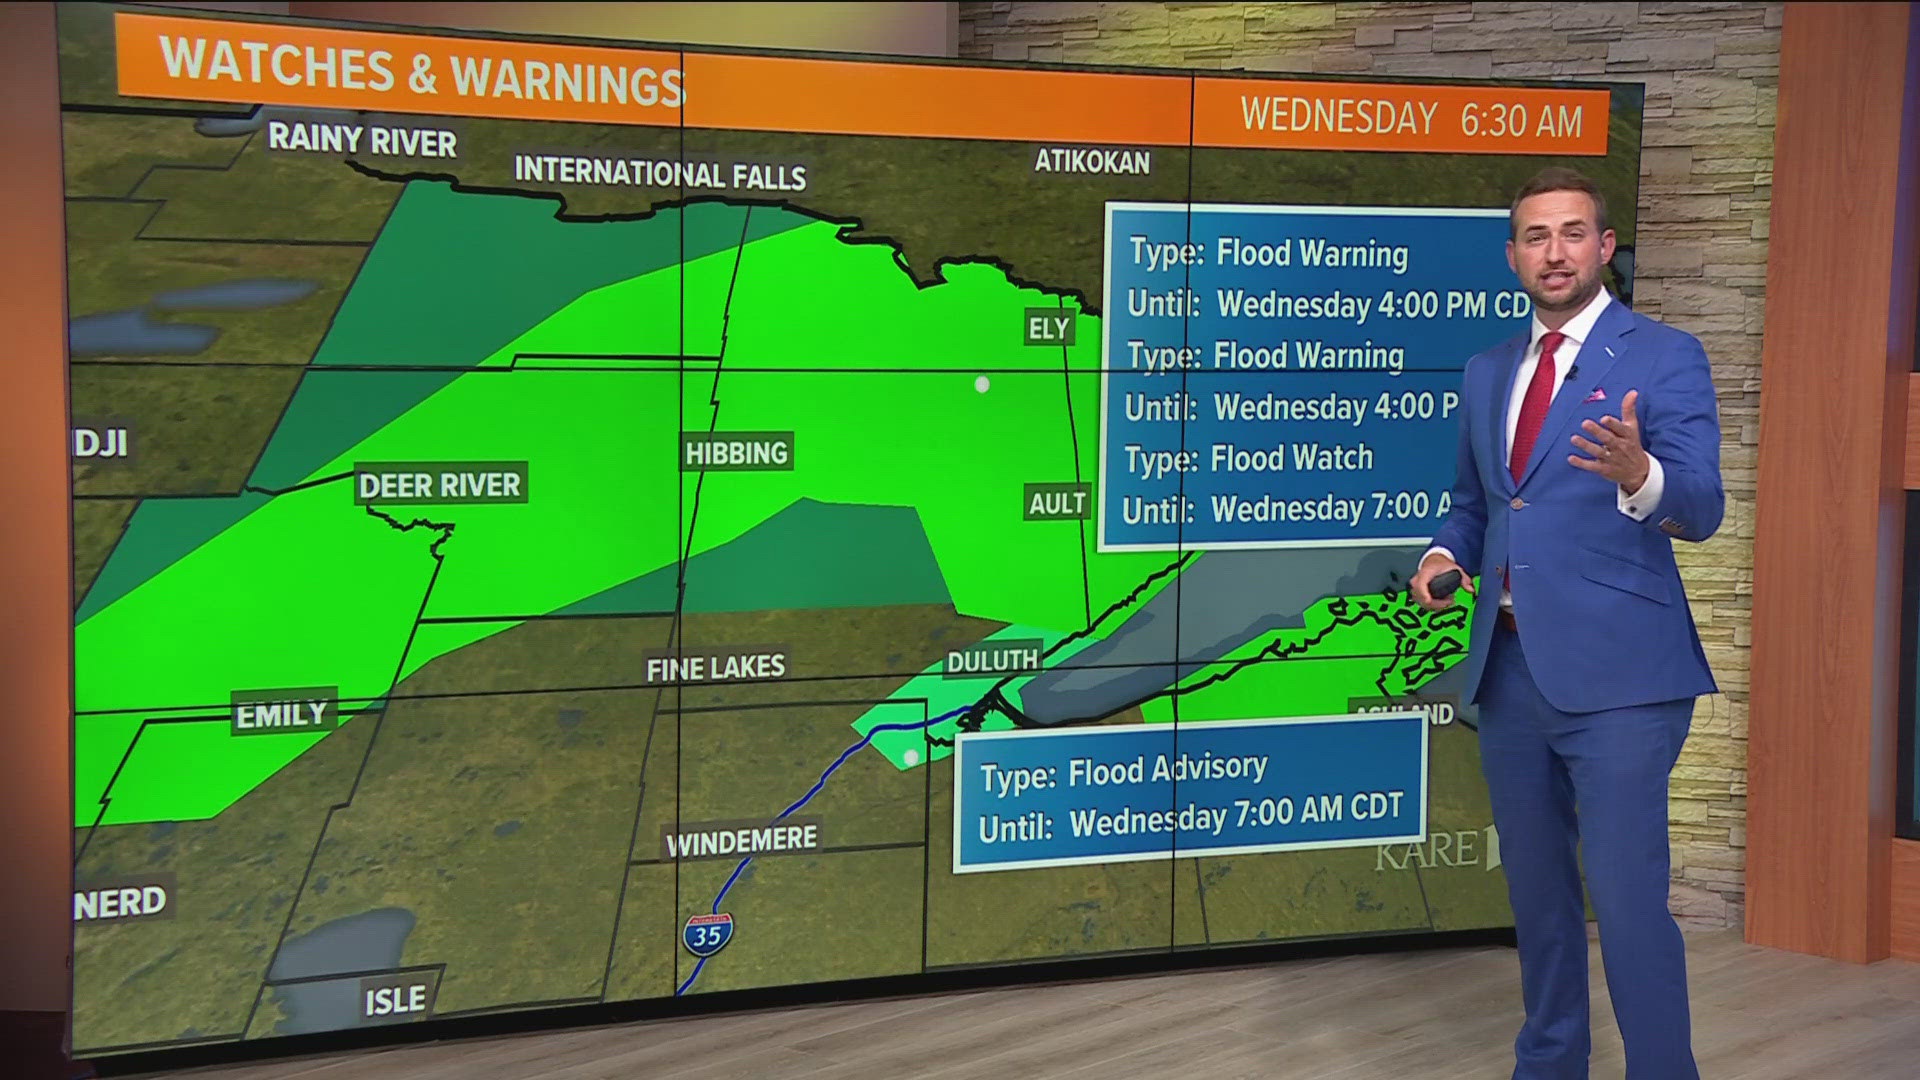 The Flash Flood Warnings have subsided, but Flood Warnings remain Wednesday in Duluth, Ely and other areas in northern Minnesota.